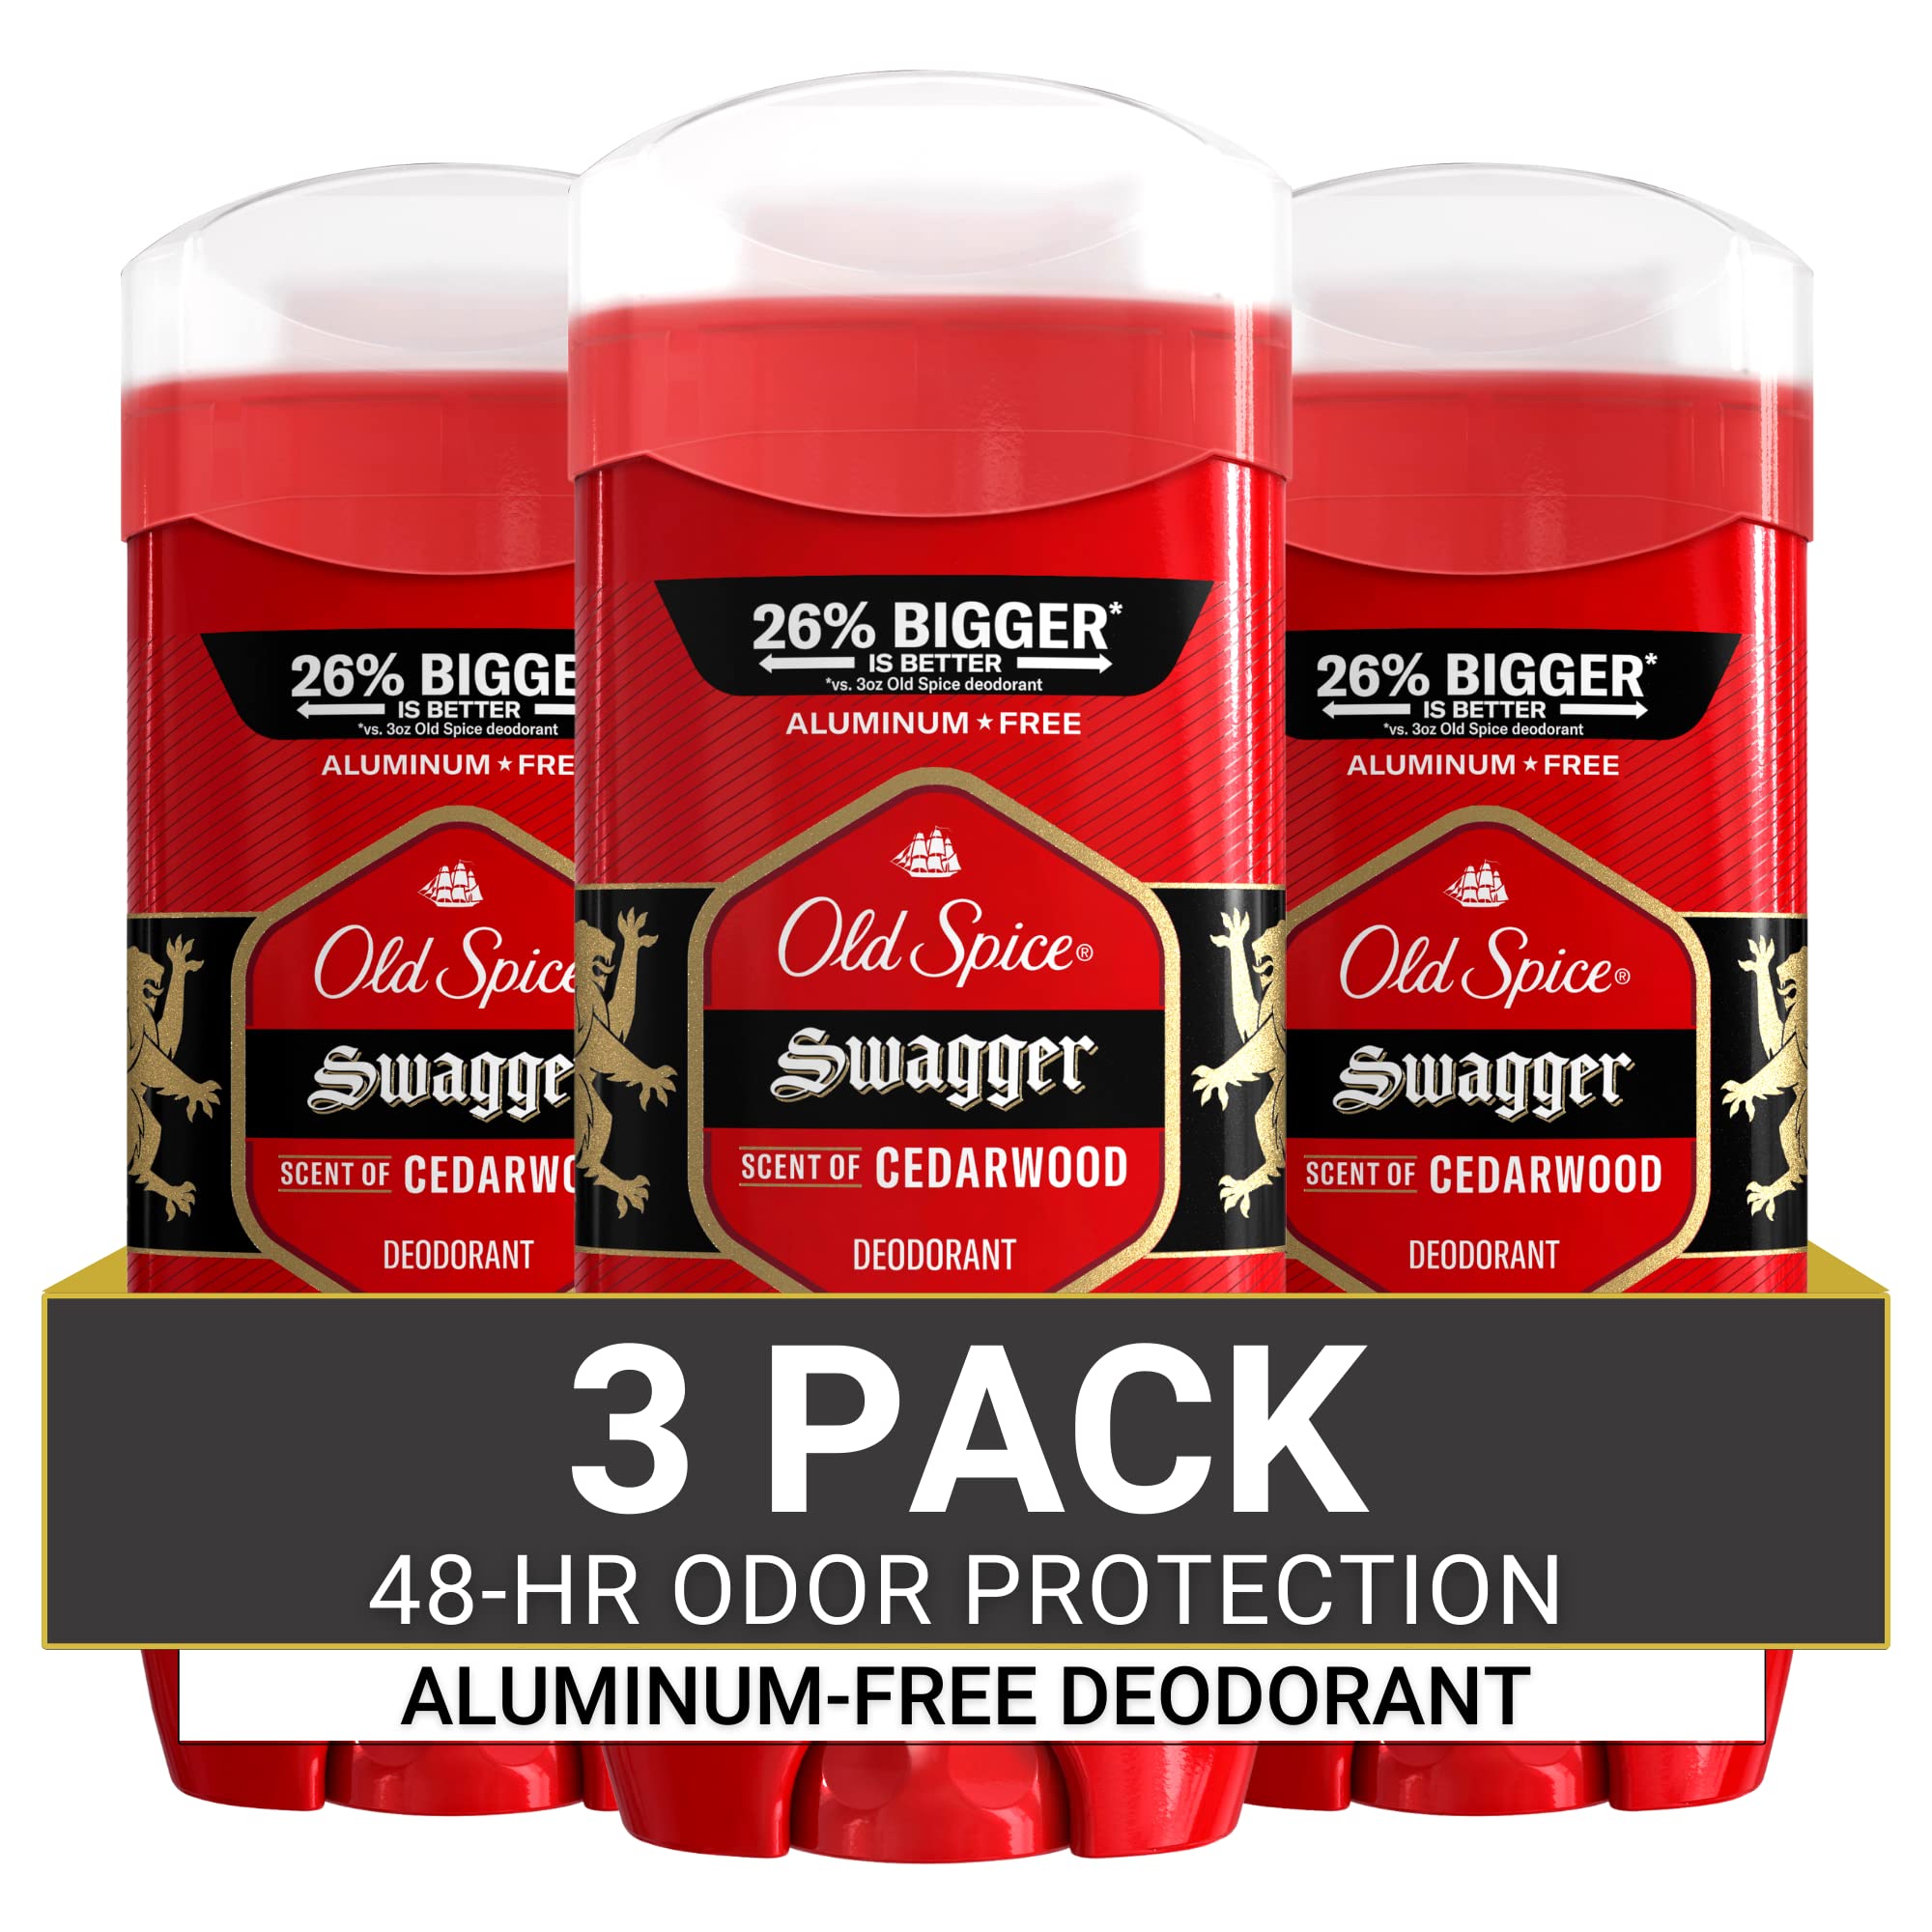 Old Spice Aluminum Free Deodorant for Men, Swagger Scent, 3.8oz Pack of 3